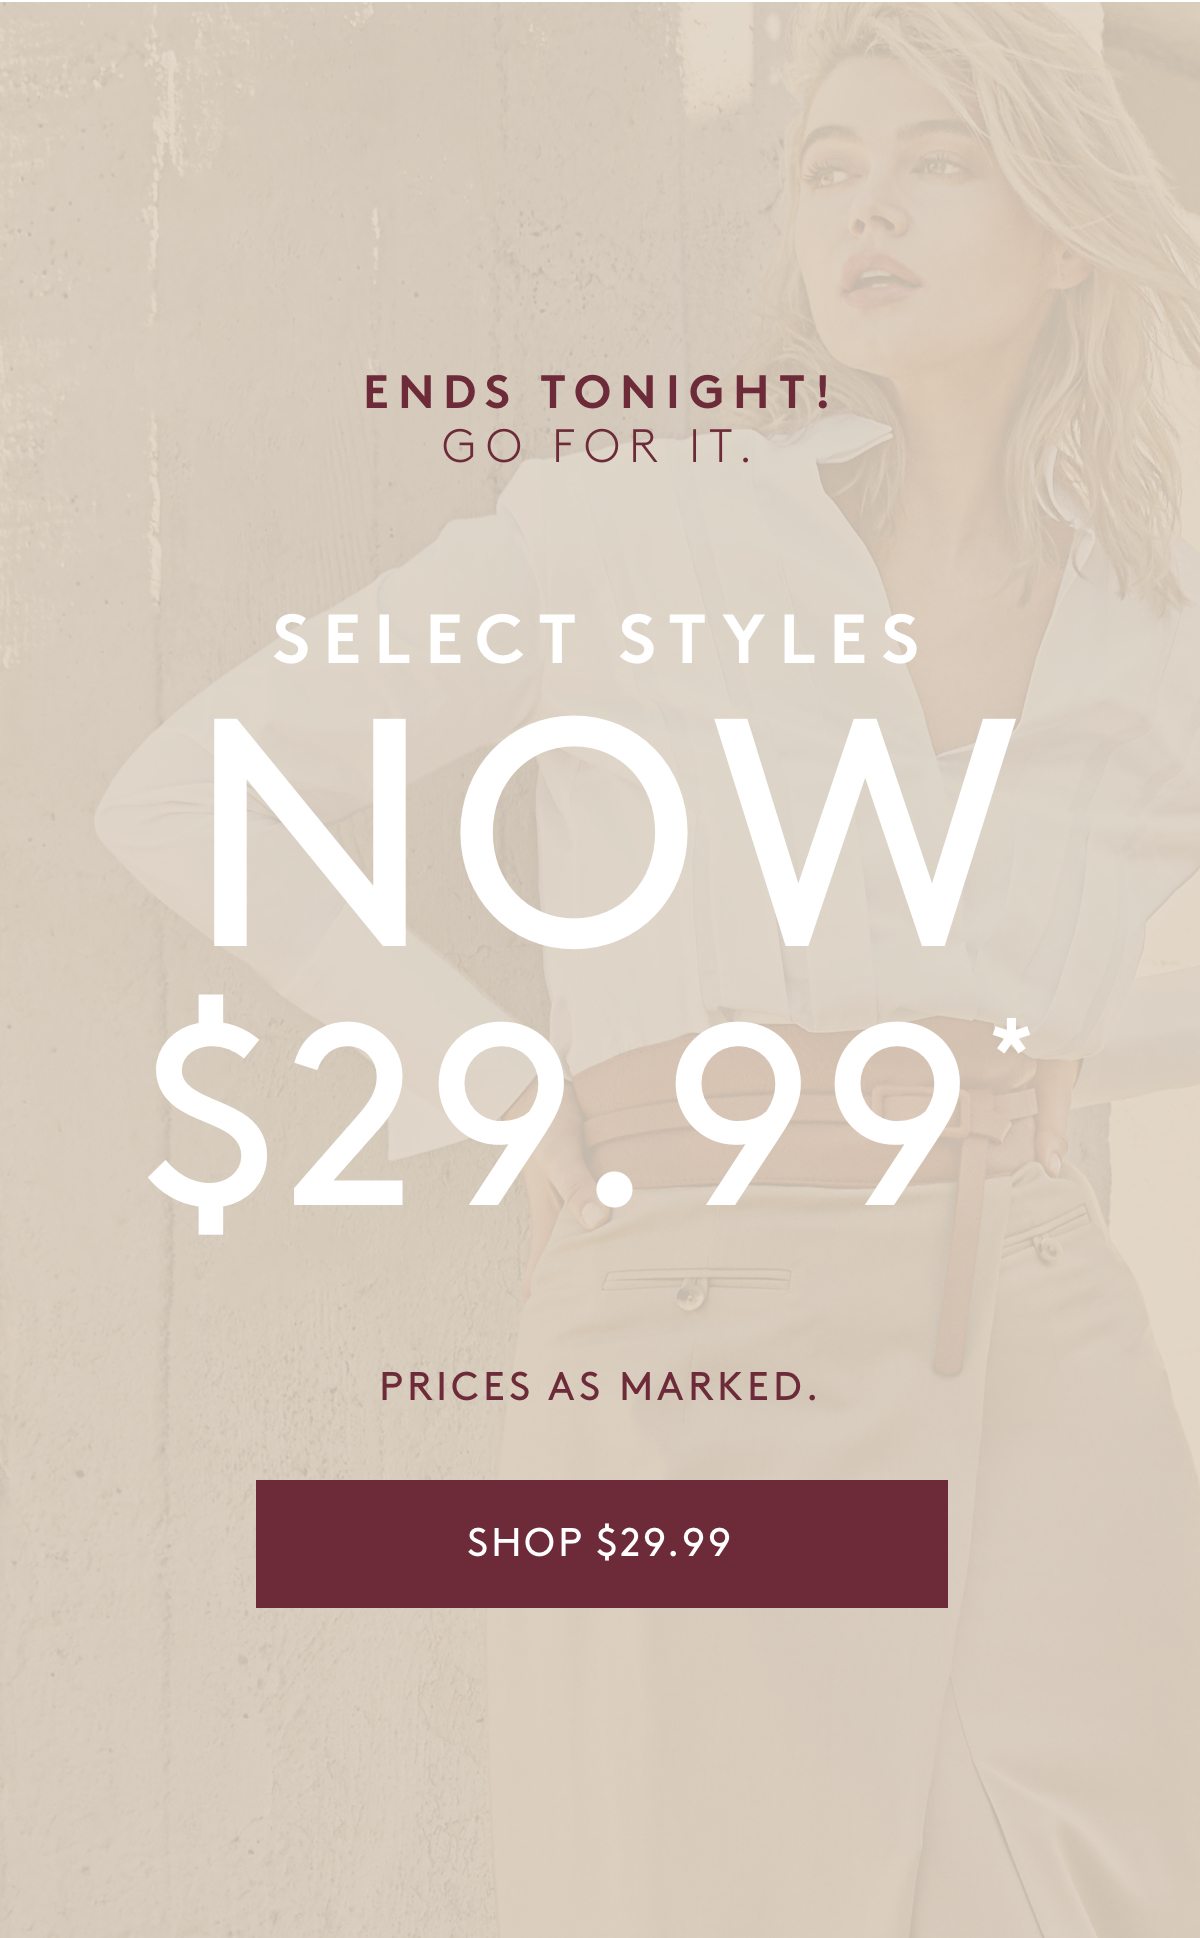 Ends Tonight! Go For It. Select Styles Now $29.99* Prices As Marked. | Shop $29.99